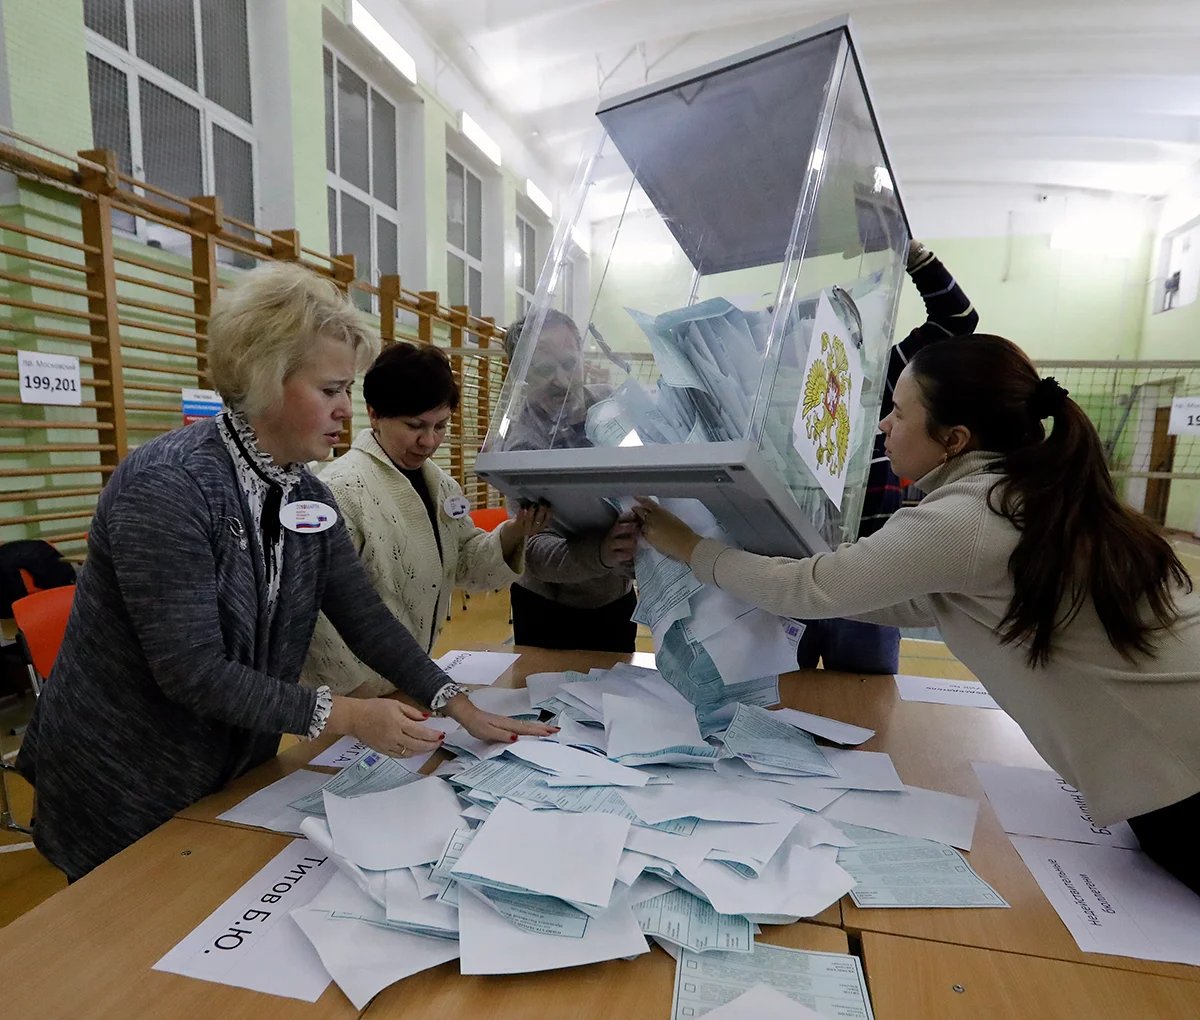 Polling station staff count votes during the presidential election in St. Petersburg, 18 March 2018. Photo: Anatoly Maltsev / EPA-EFE